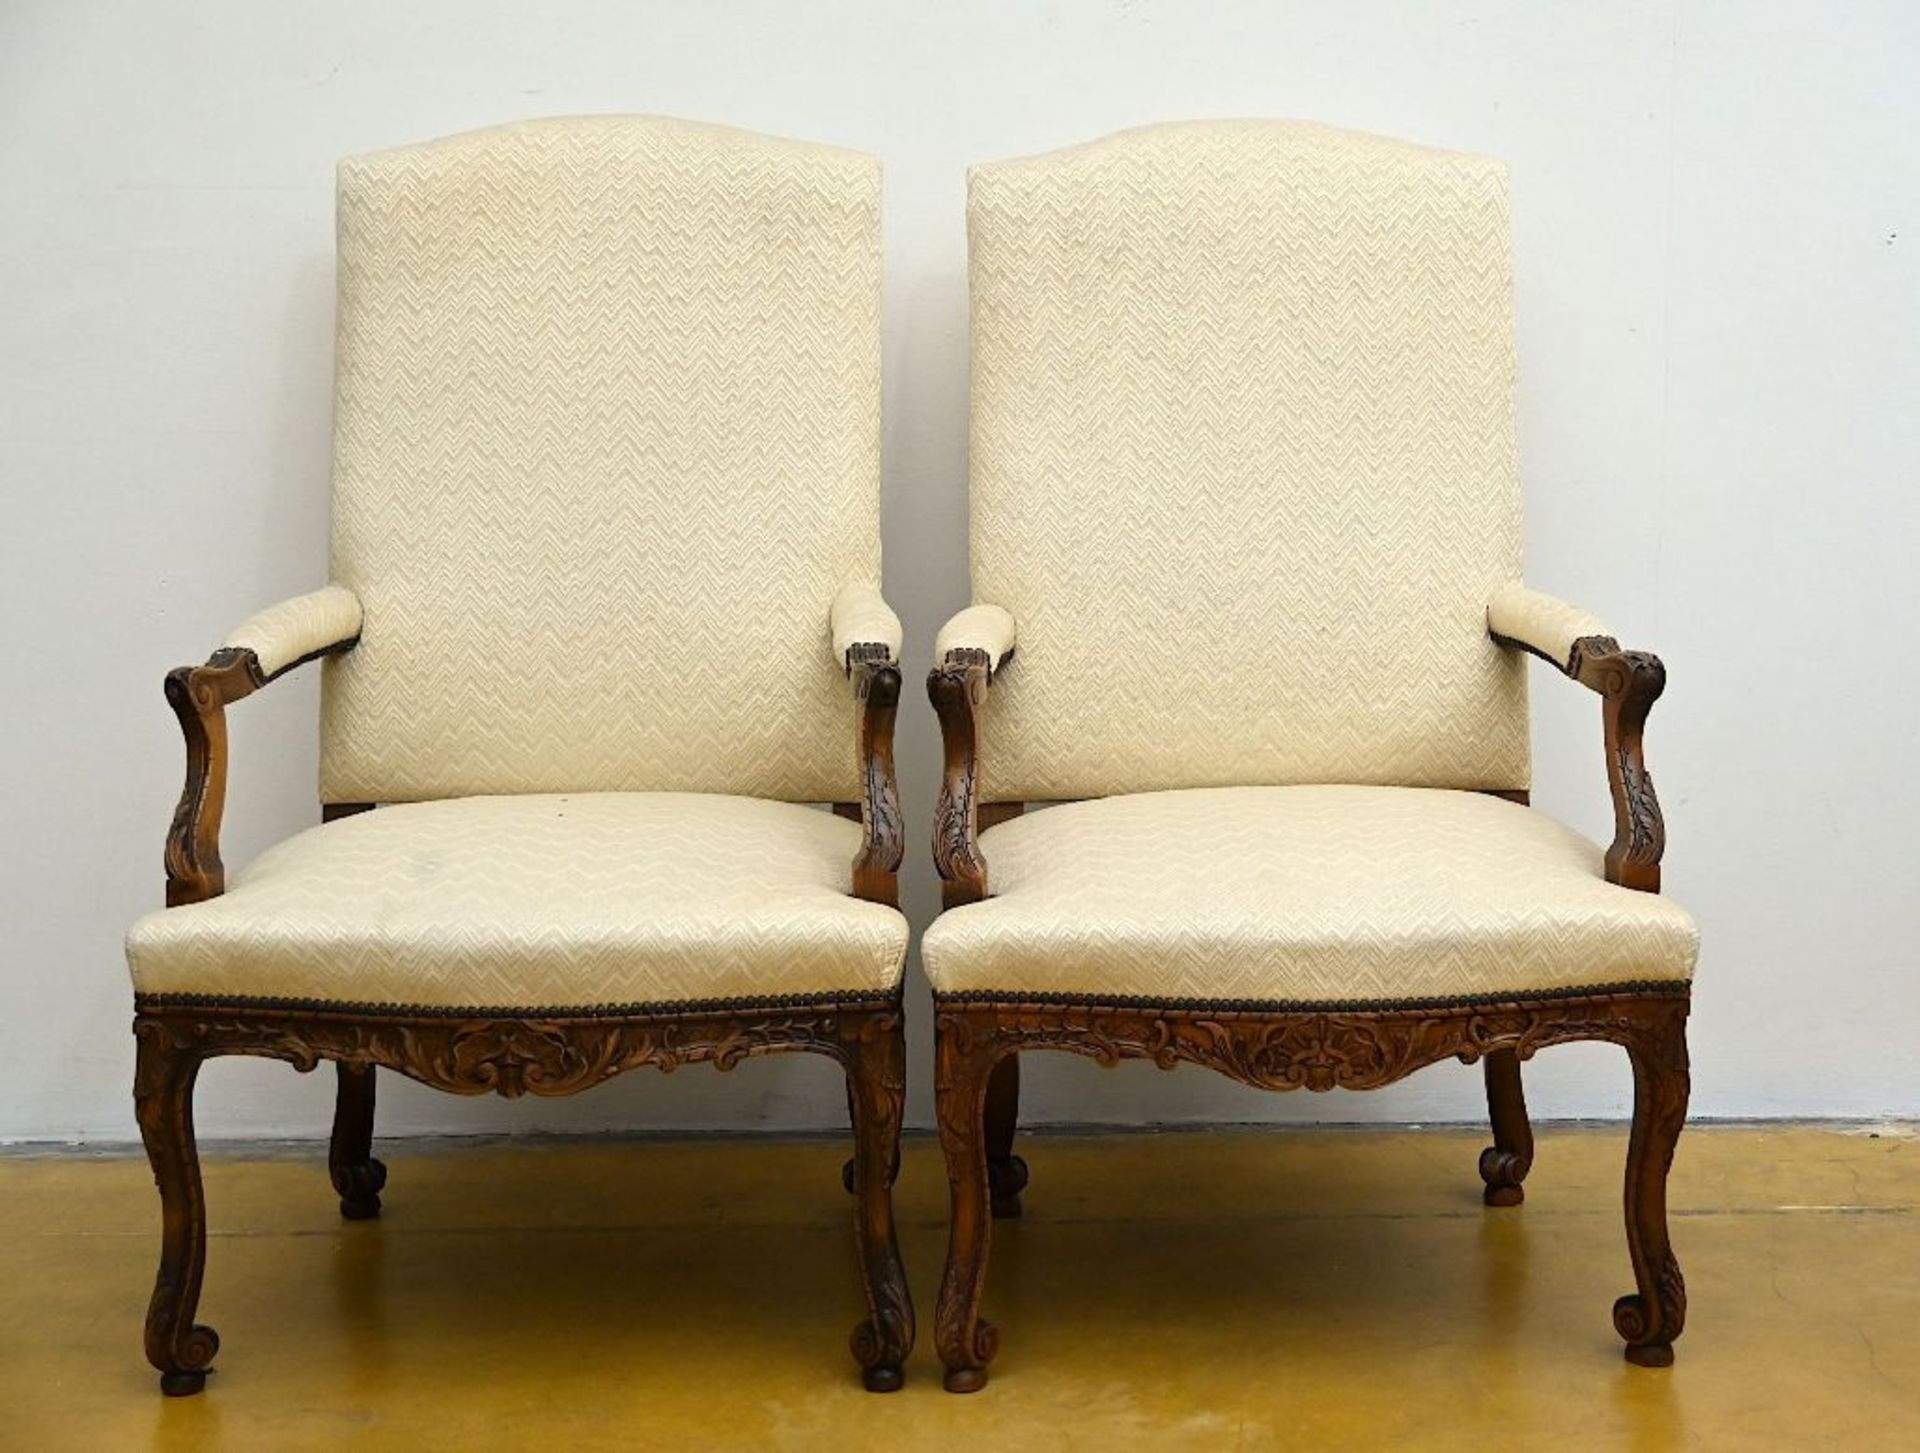 A pair of beech wood armchairs, Regence style